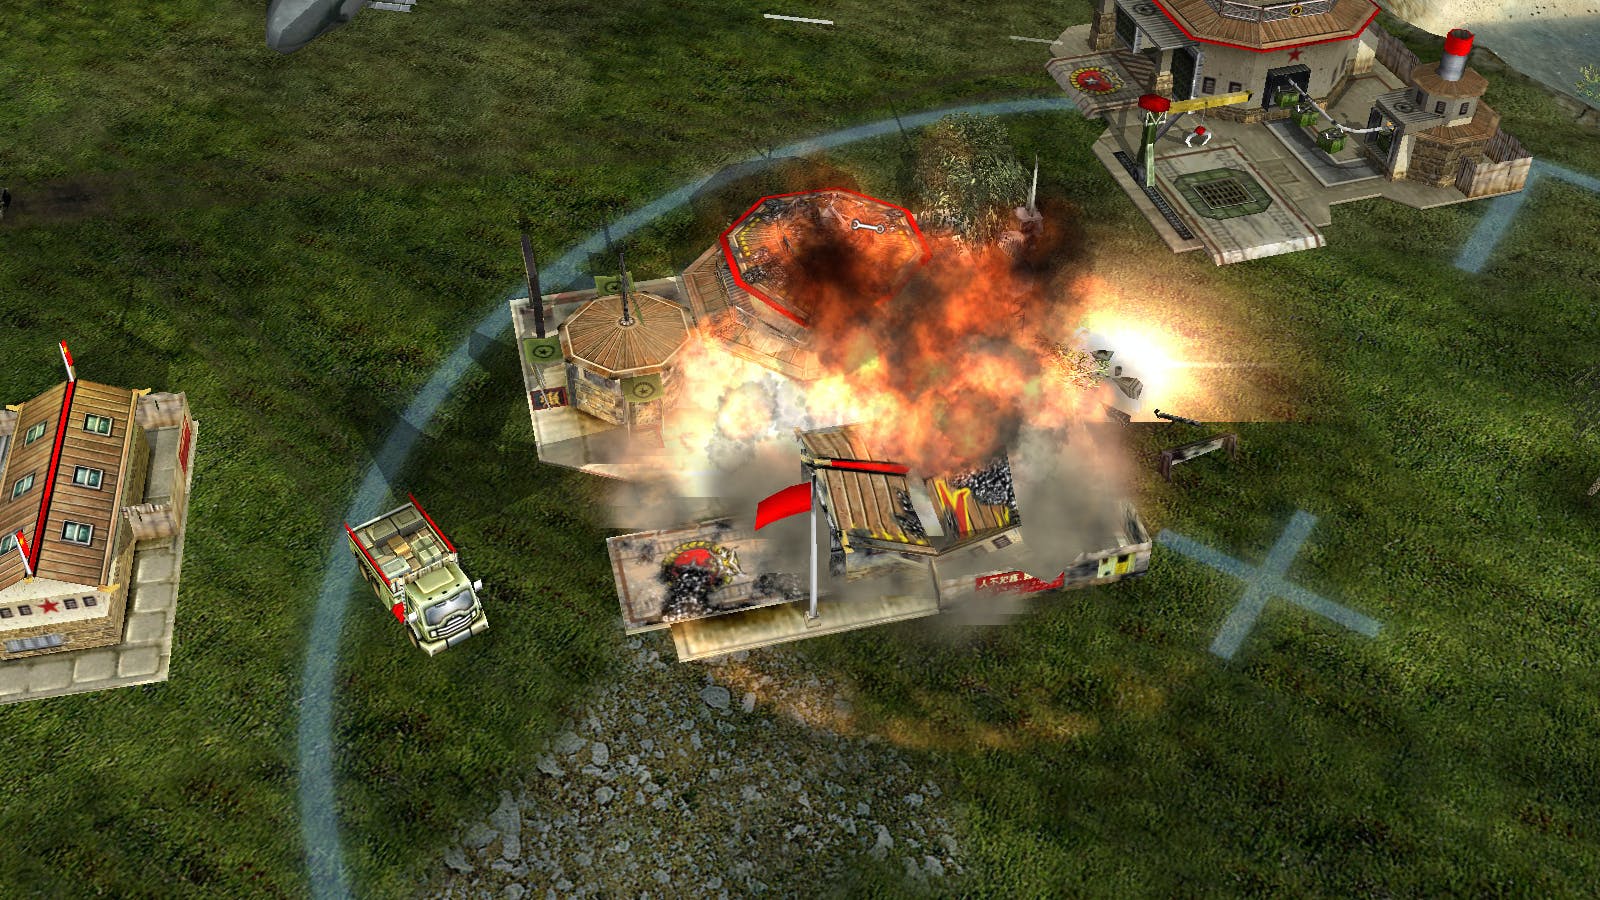 command and conquer generals 2 zero hour download